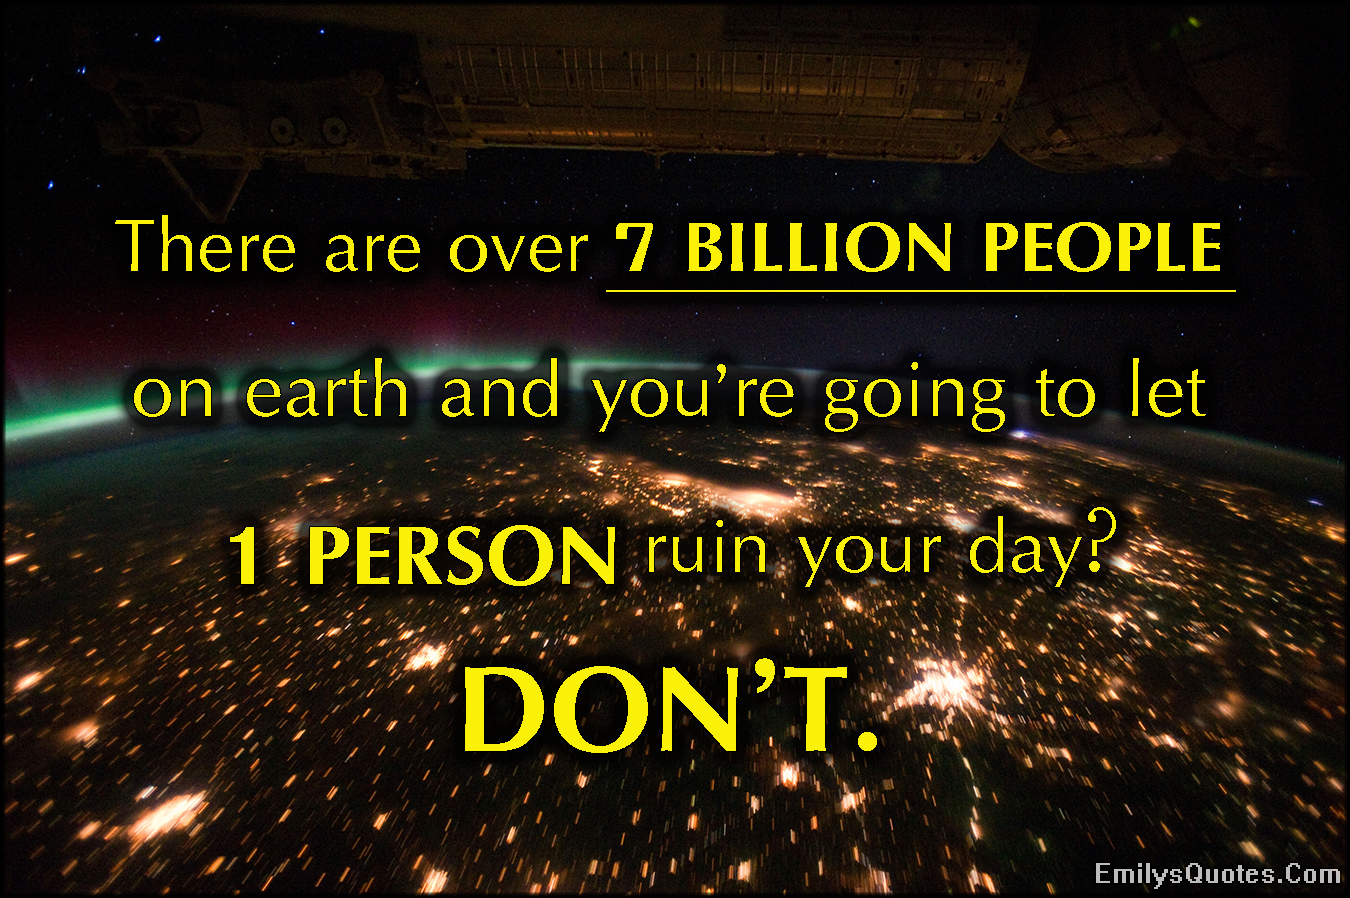 There are over 7 BILLION PEOPLE on earth and you’re going to let 1 PERSON ruin your day? DON’T